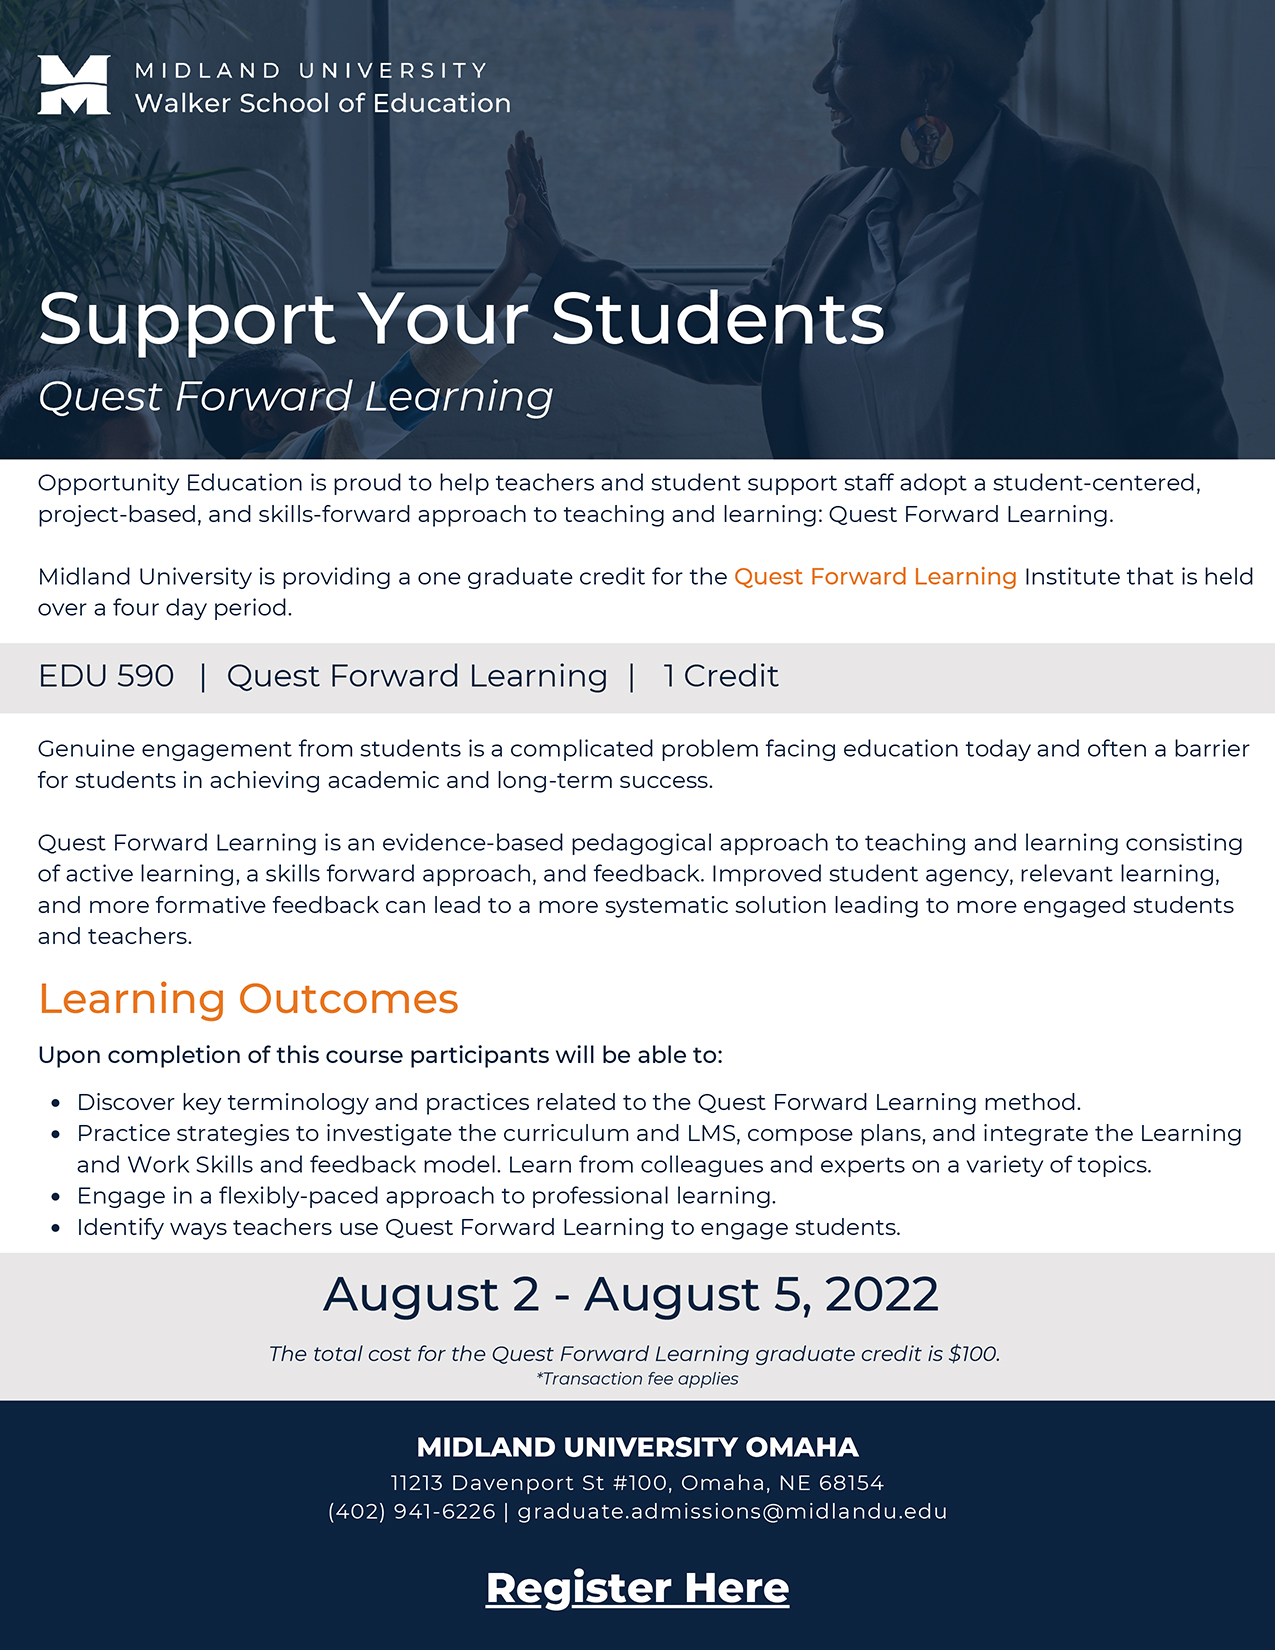 Earn graduate credit from Midland University for participating in Quest Forward Learning Institute!